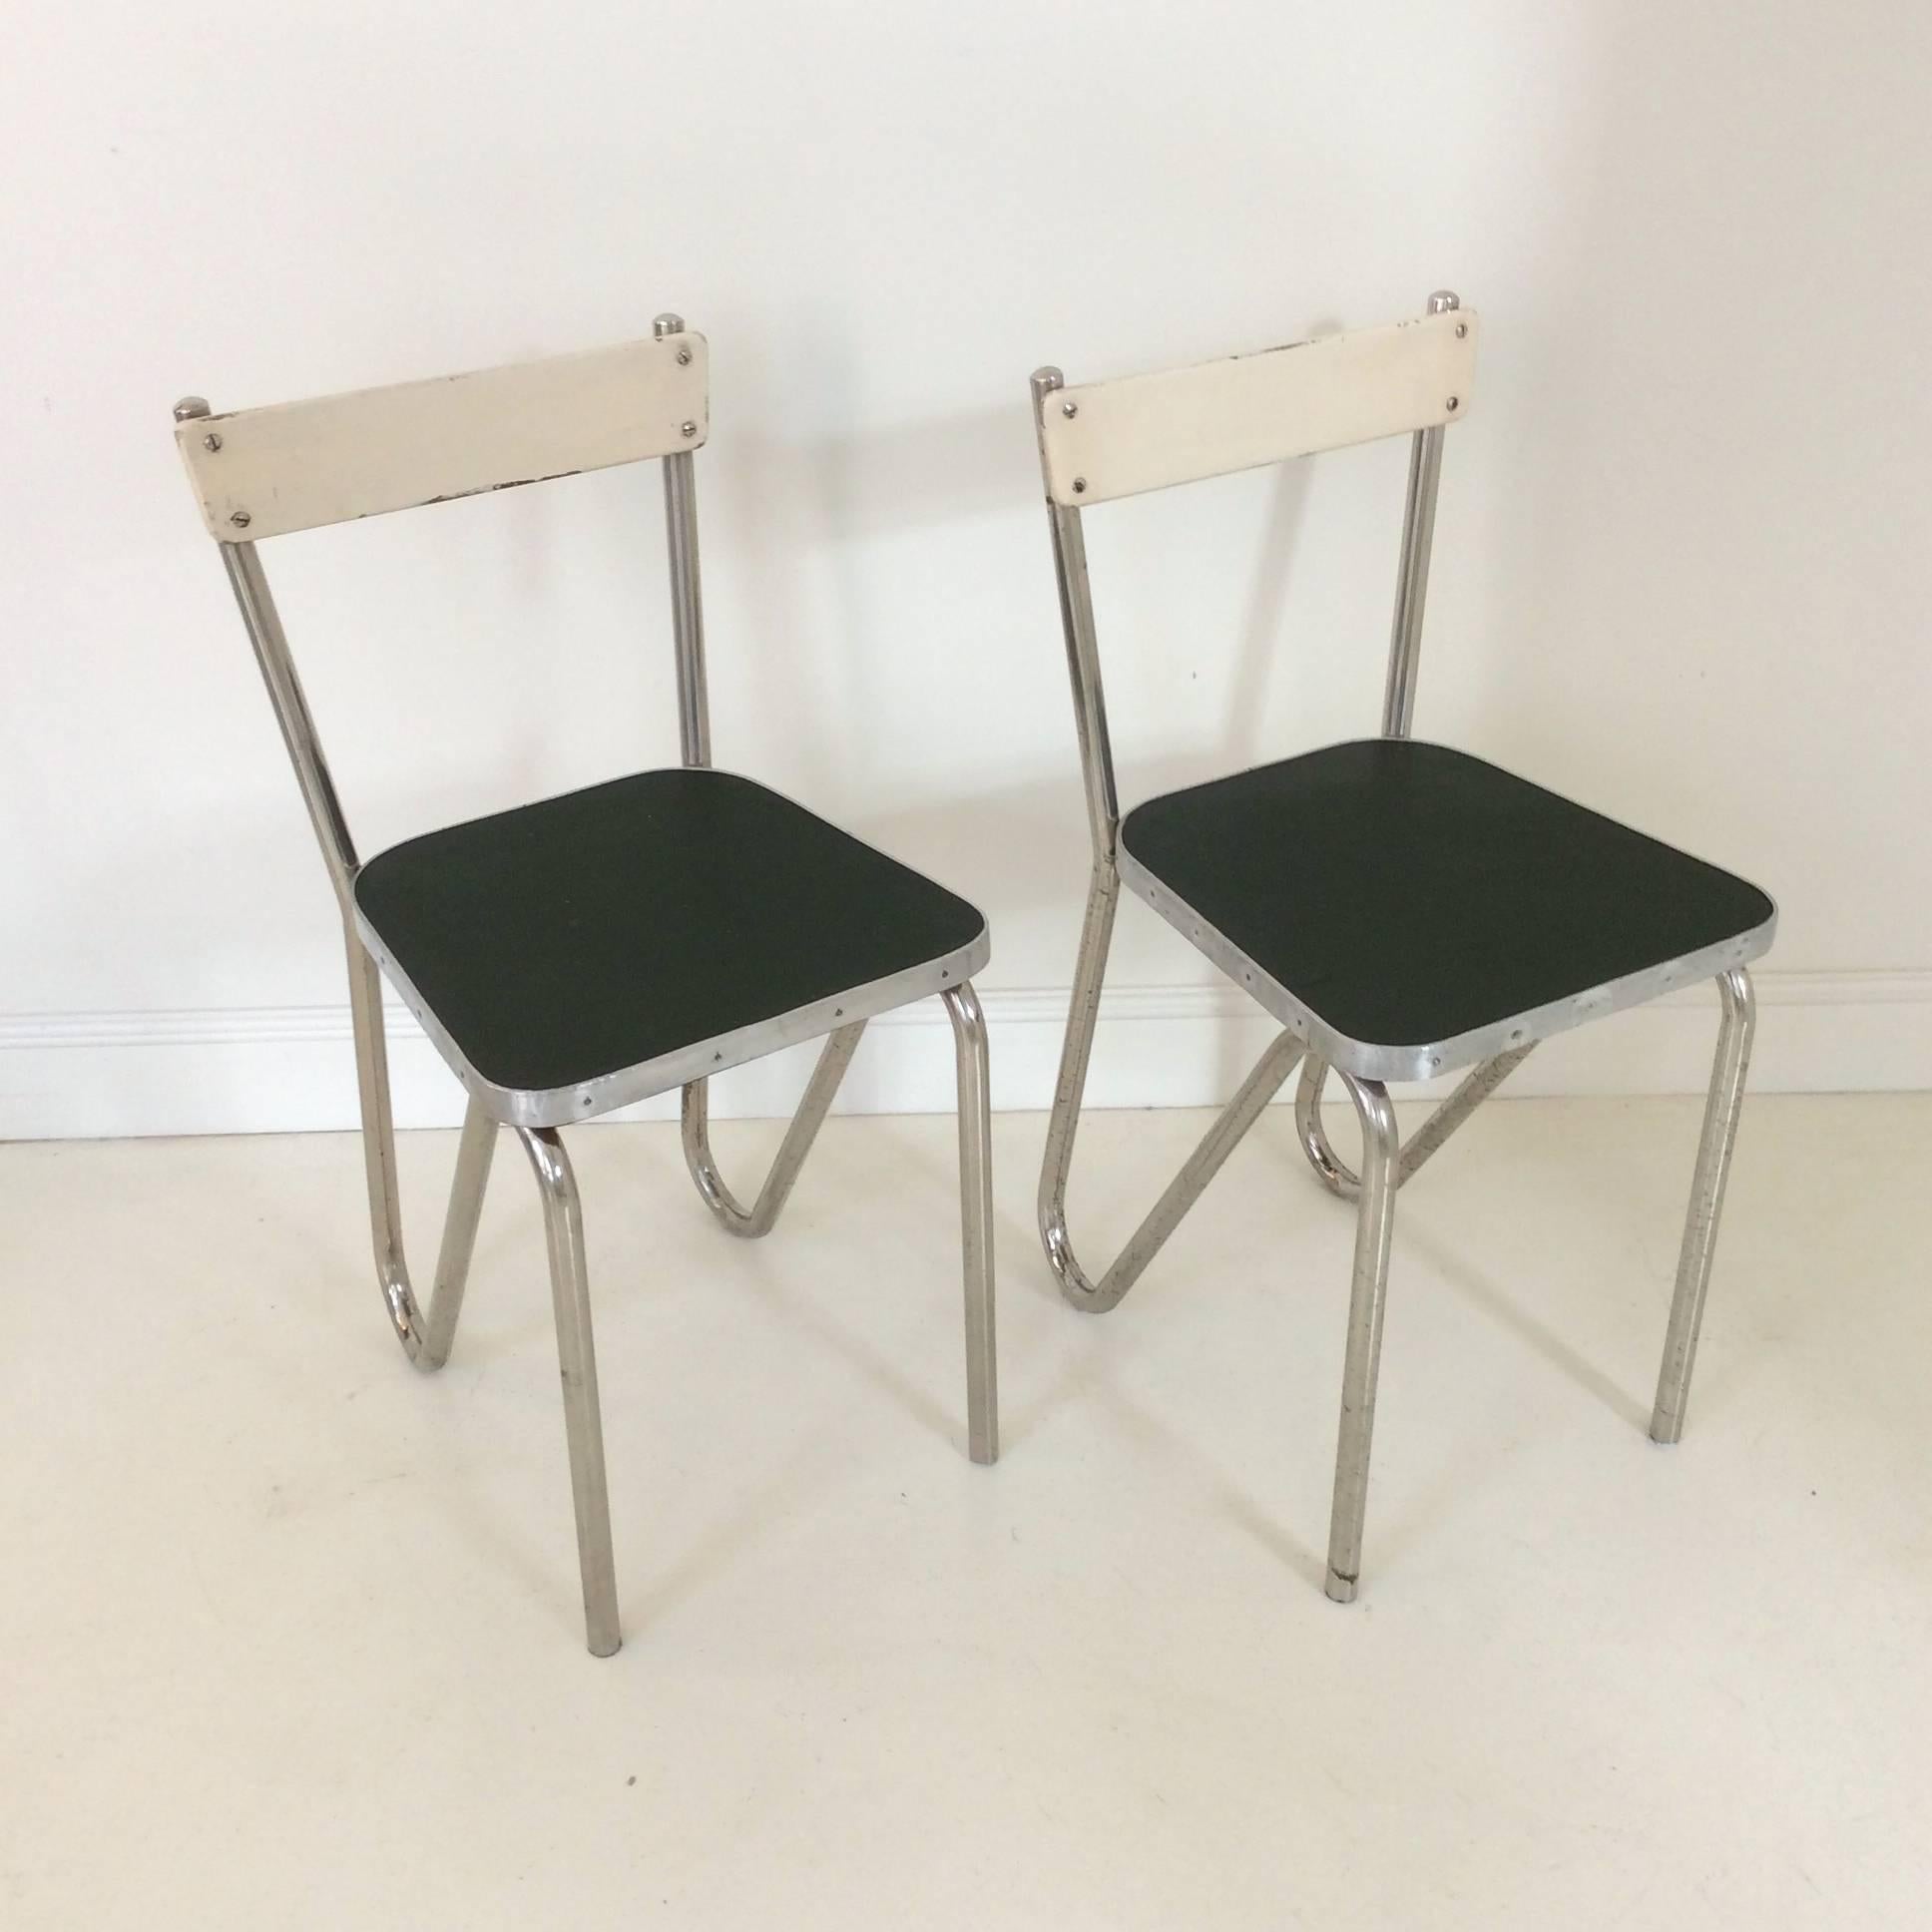 Pair of modernist tubular chairs, circa 1930, France.
Chromed metal, aluminium, ivory painted wood and dark green linoleum.
Dimensions: H: 75 cm, seat height: 45 cm, W 36 cm, D 42 cm.
Some wear consistent with age and use.